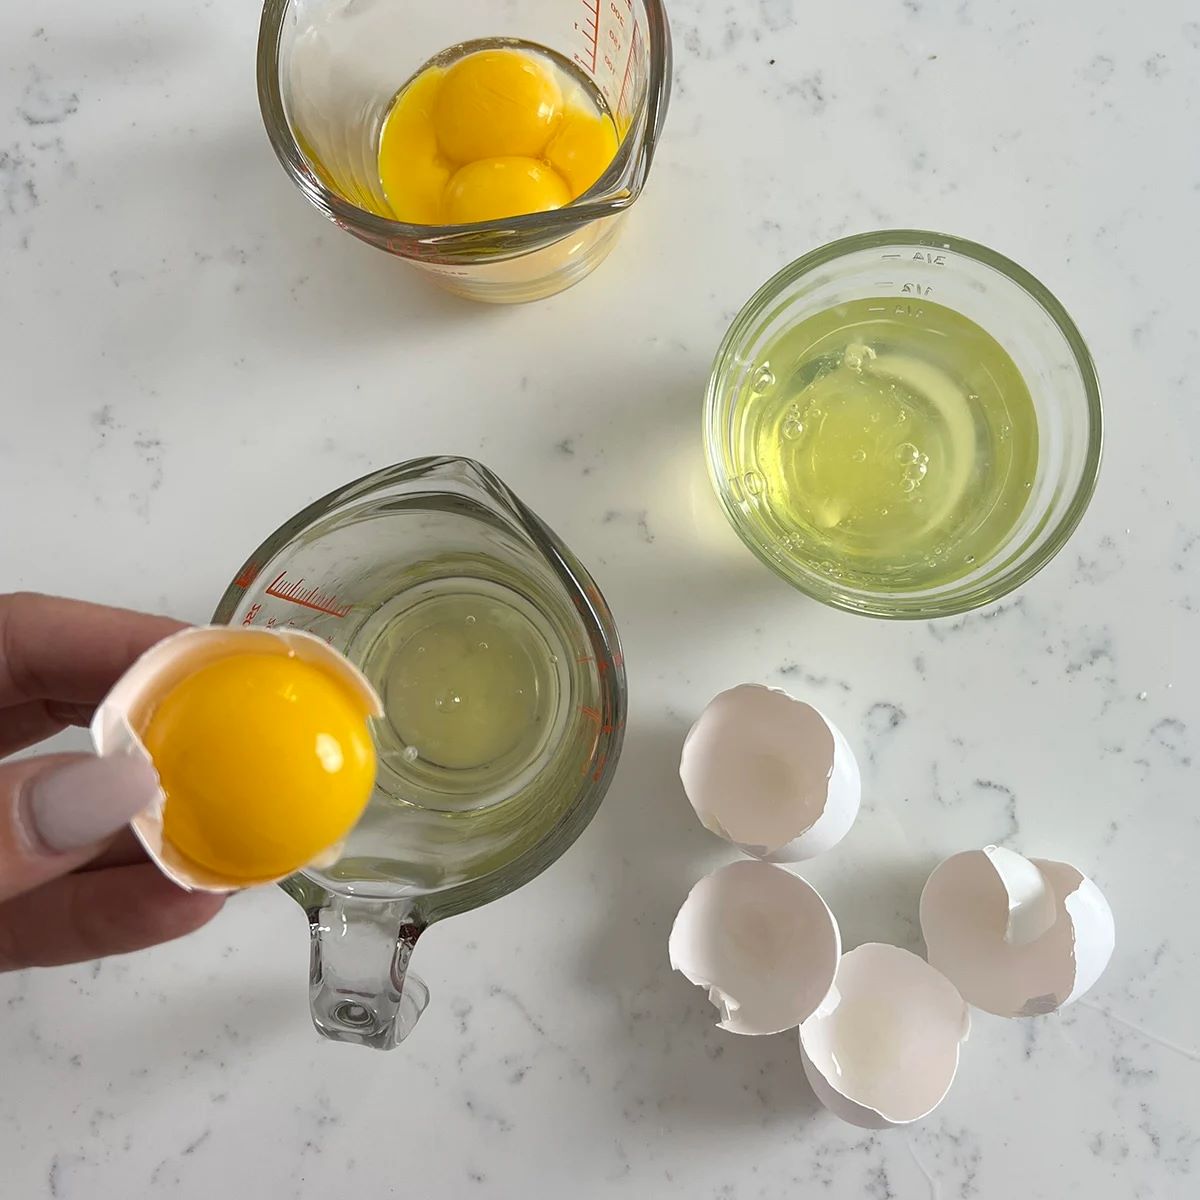 How To Store Egg Whites